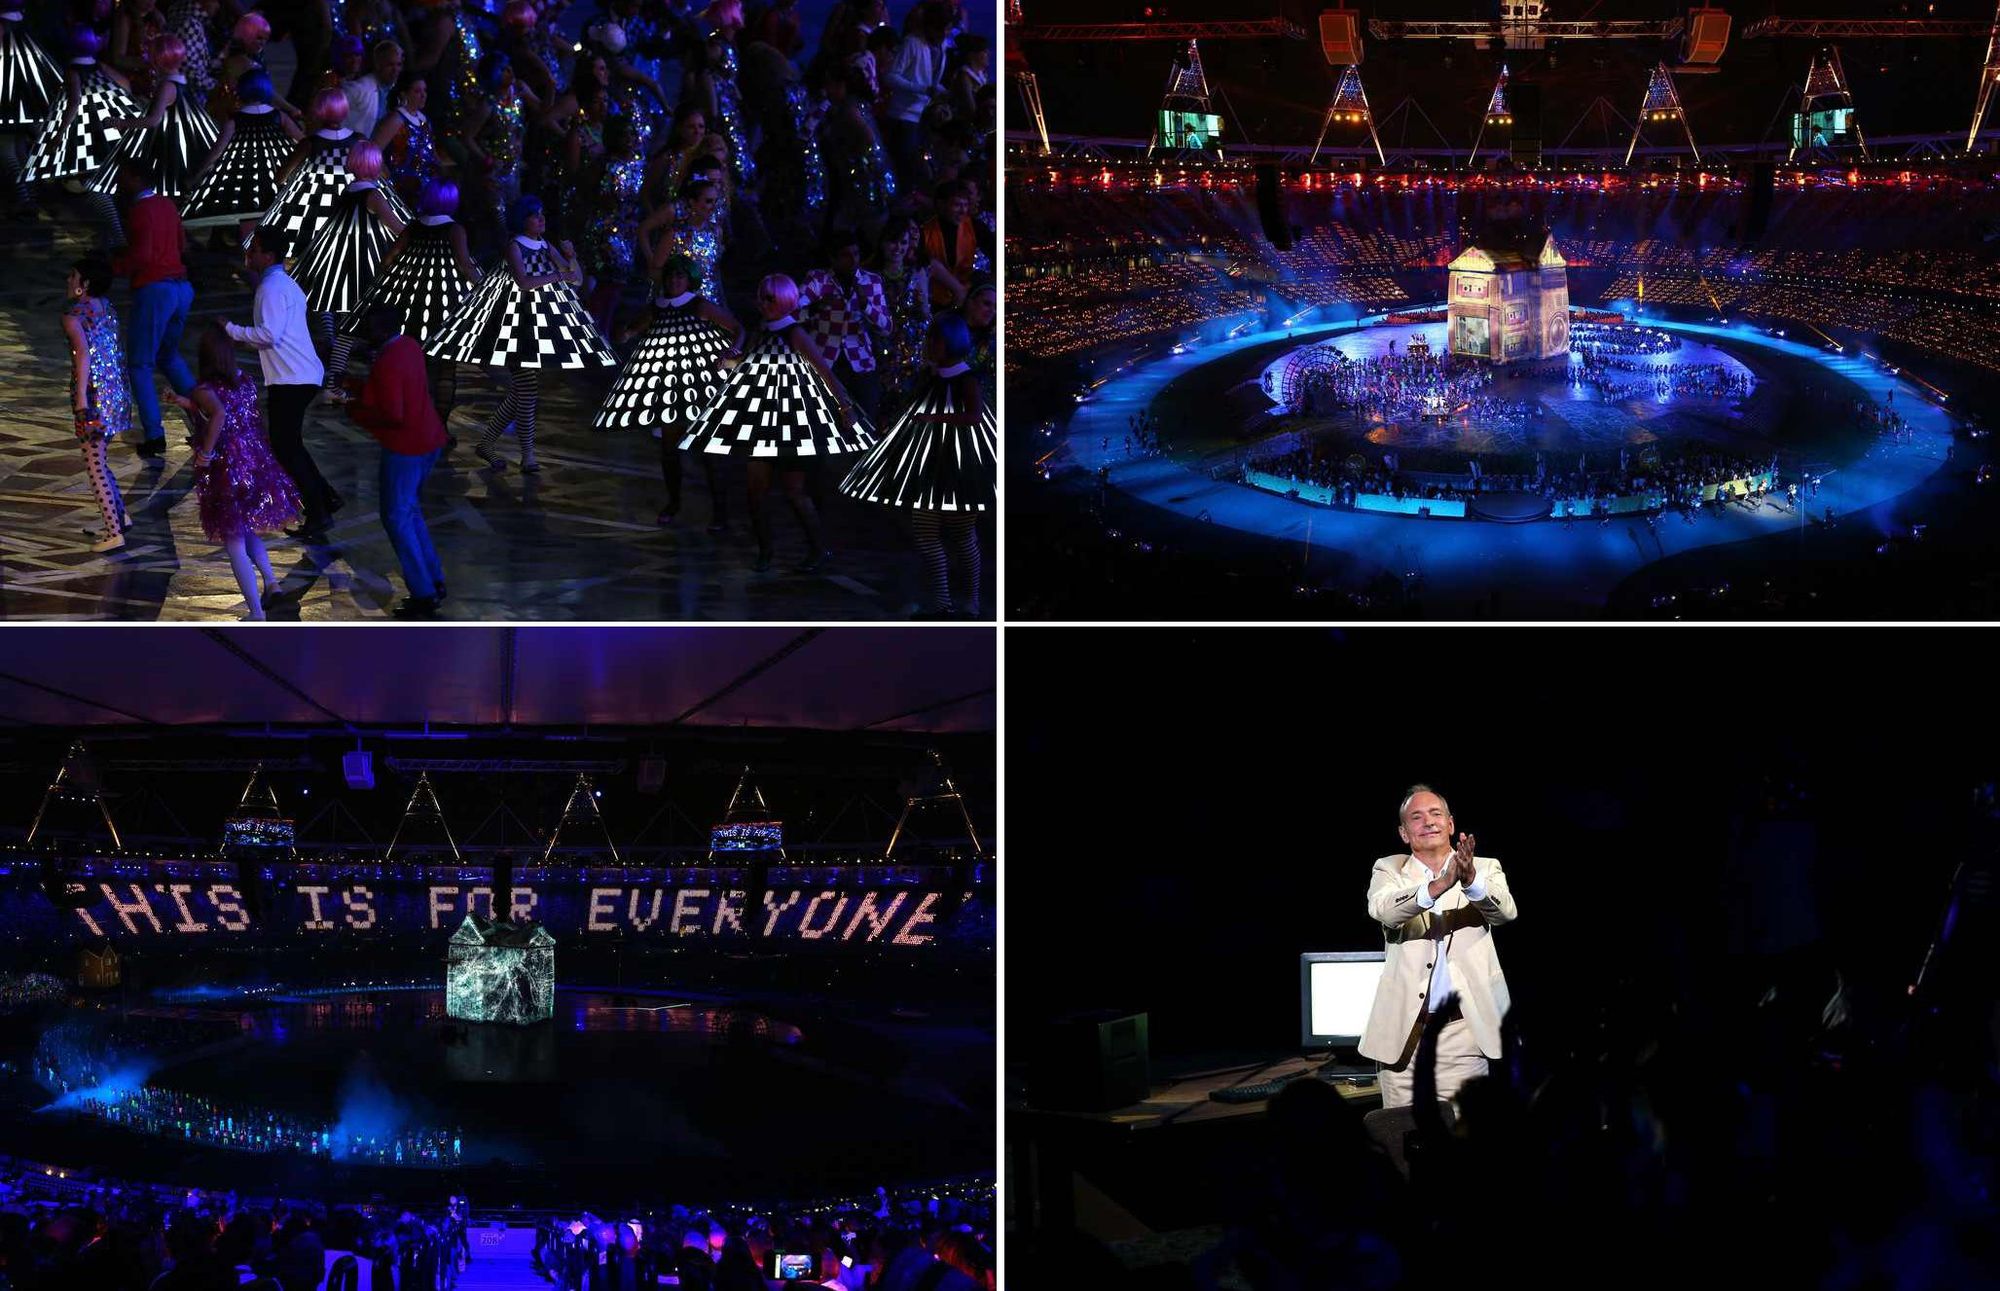 The segment on youth culture at the London 2012 Olympics Opening Ceremony